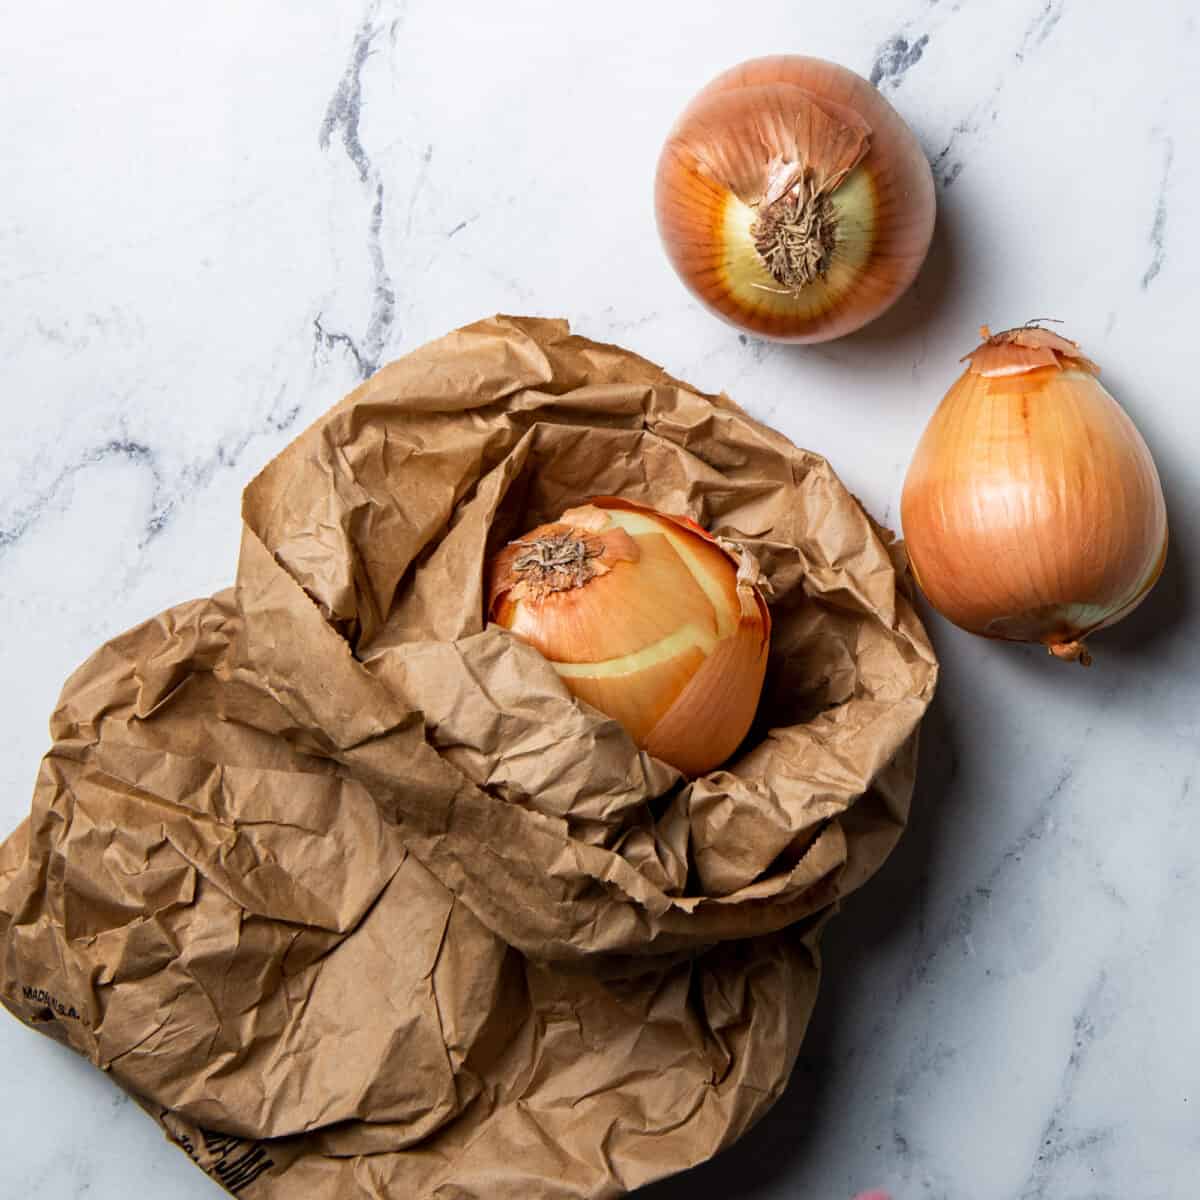 Onions in a brown paper bag with two onions on the counter.